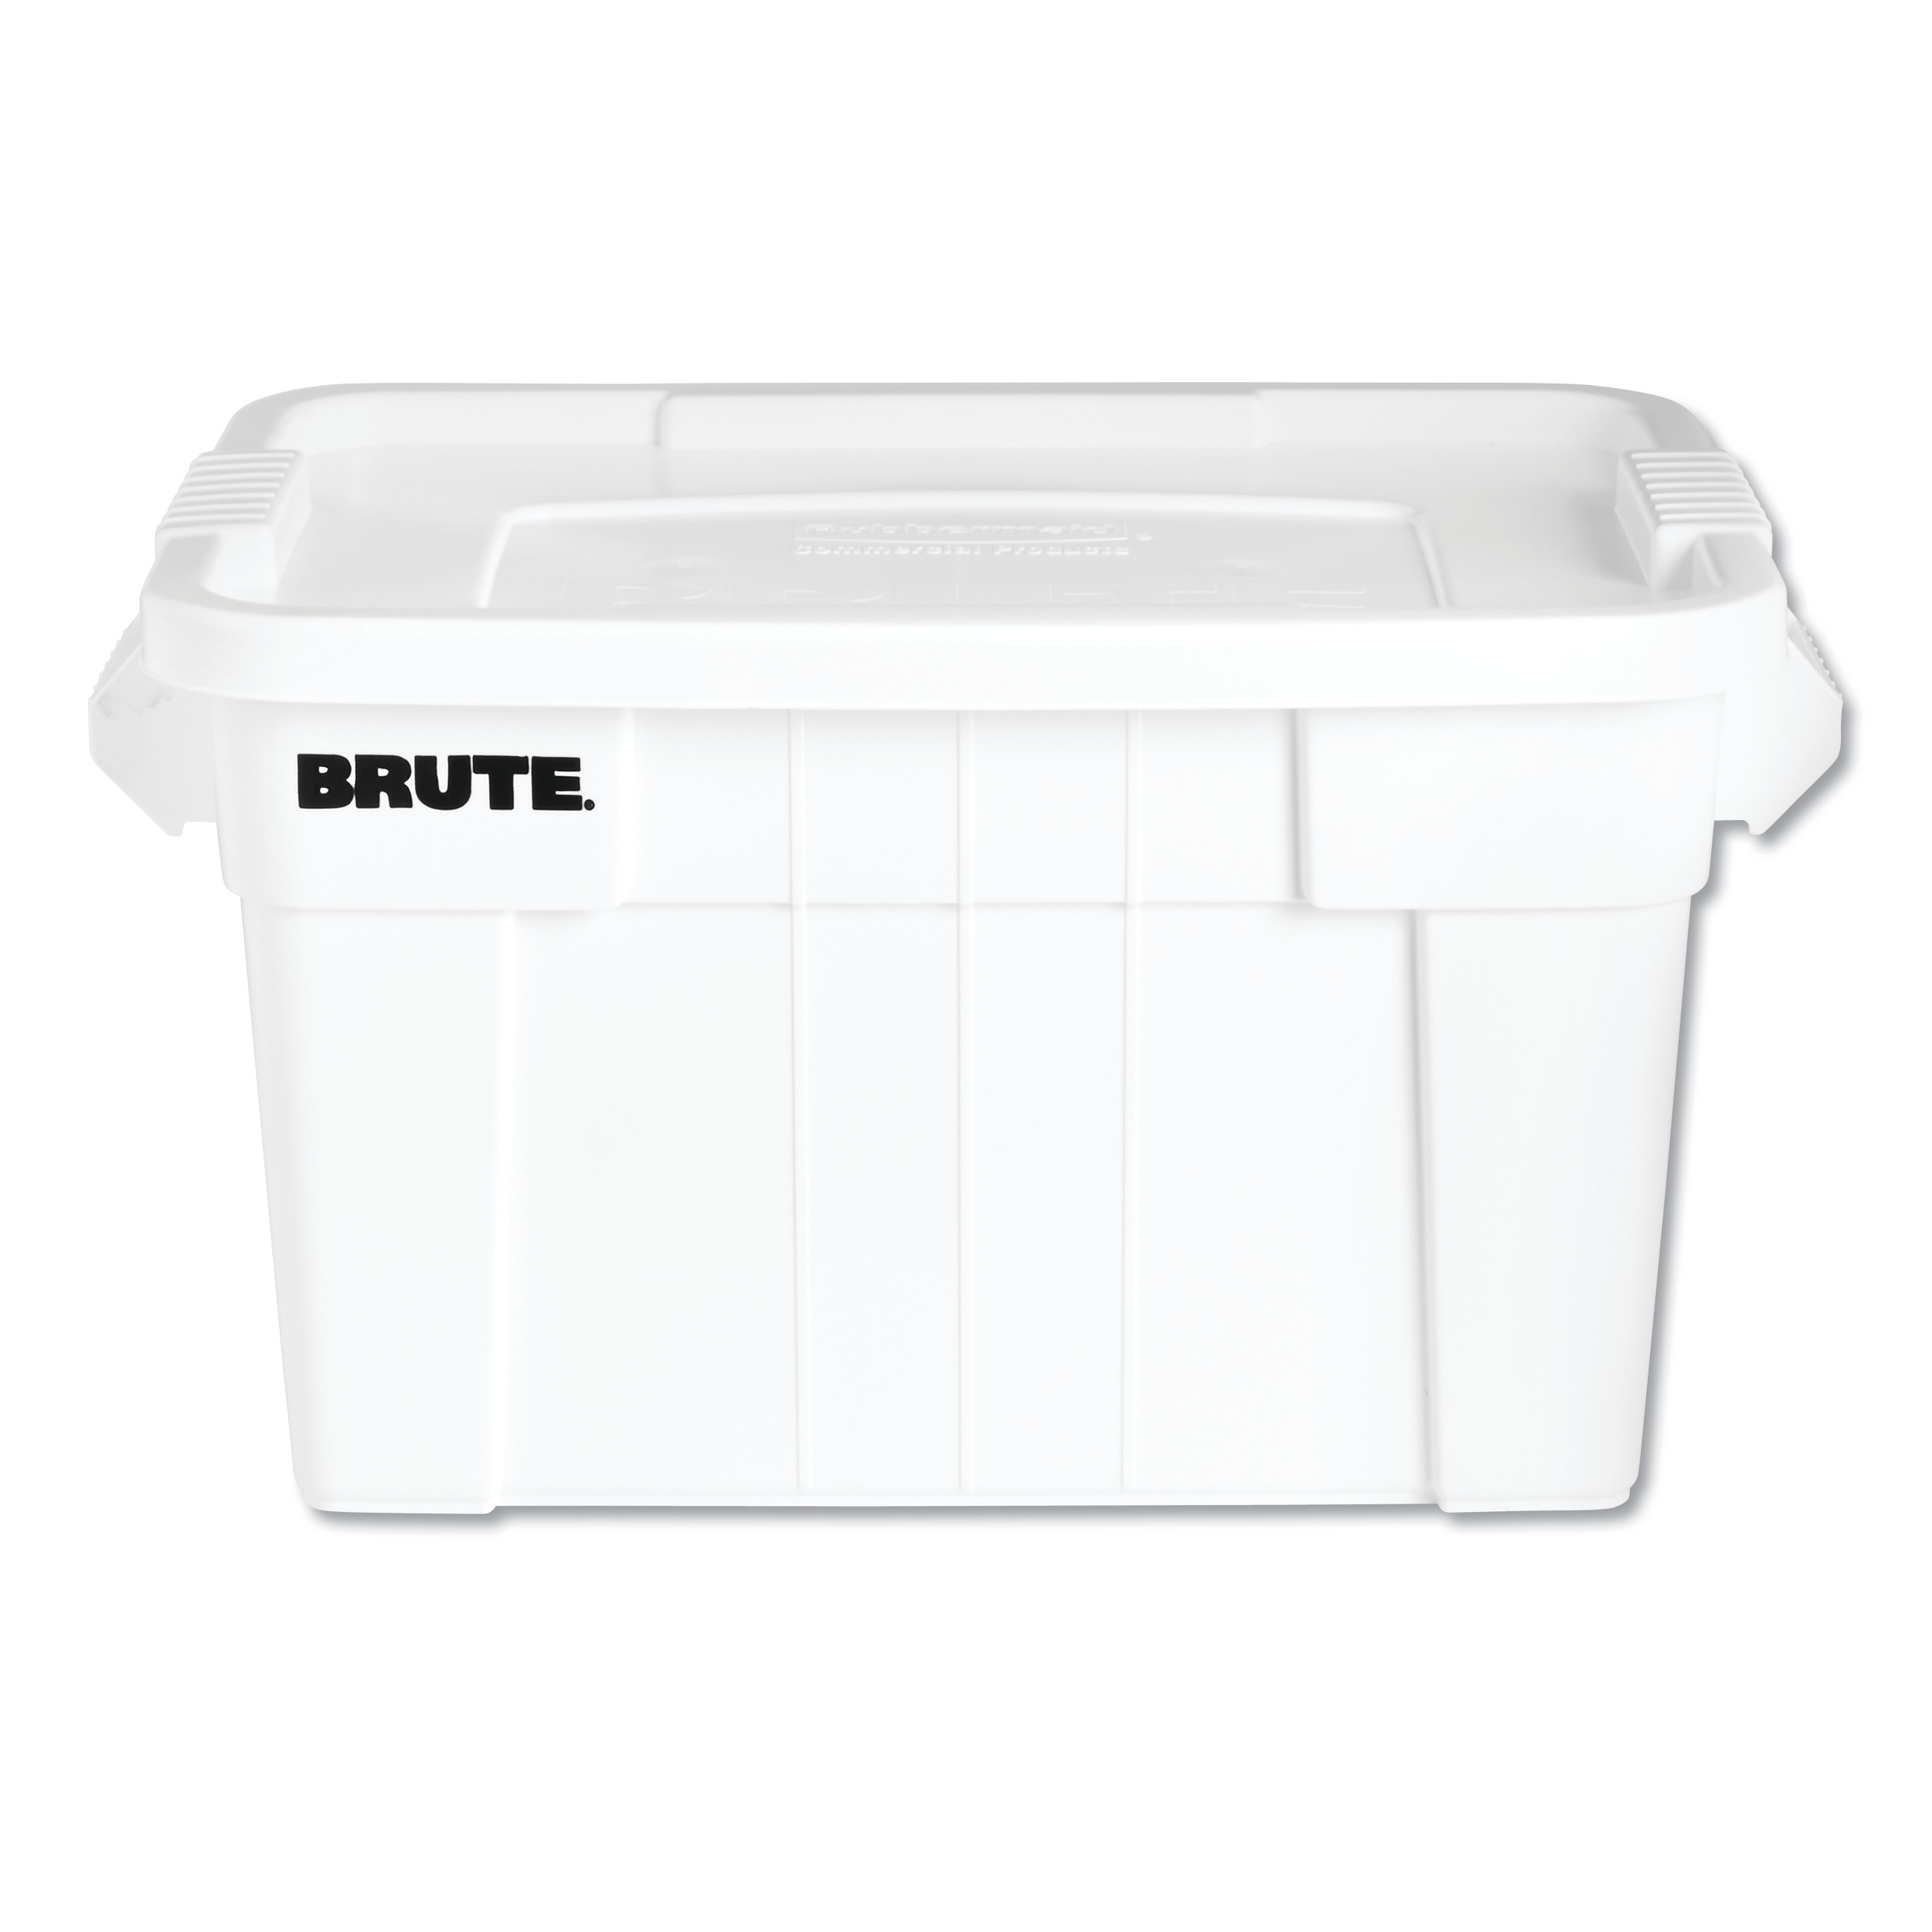  Rubbermaid Commercial FG9S3100WHT BRUTE Tote with Lid, 20 gal, 27.9w x 17.4d x 15.1h, White (RCP9S31WHIEA) 